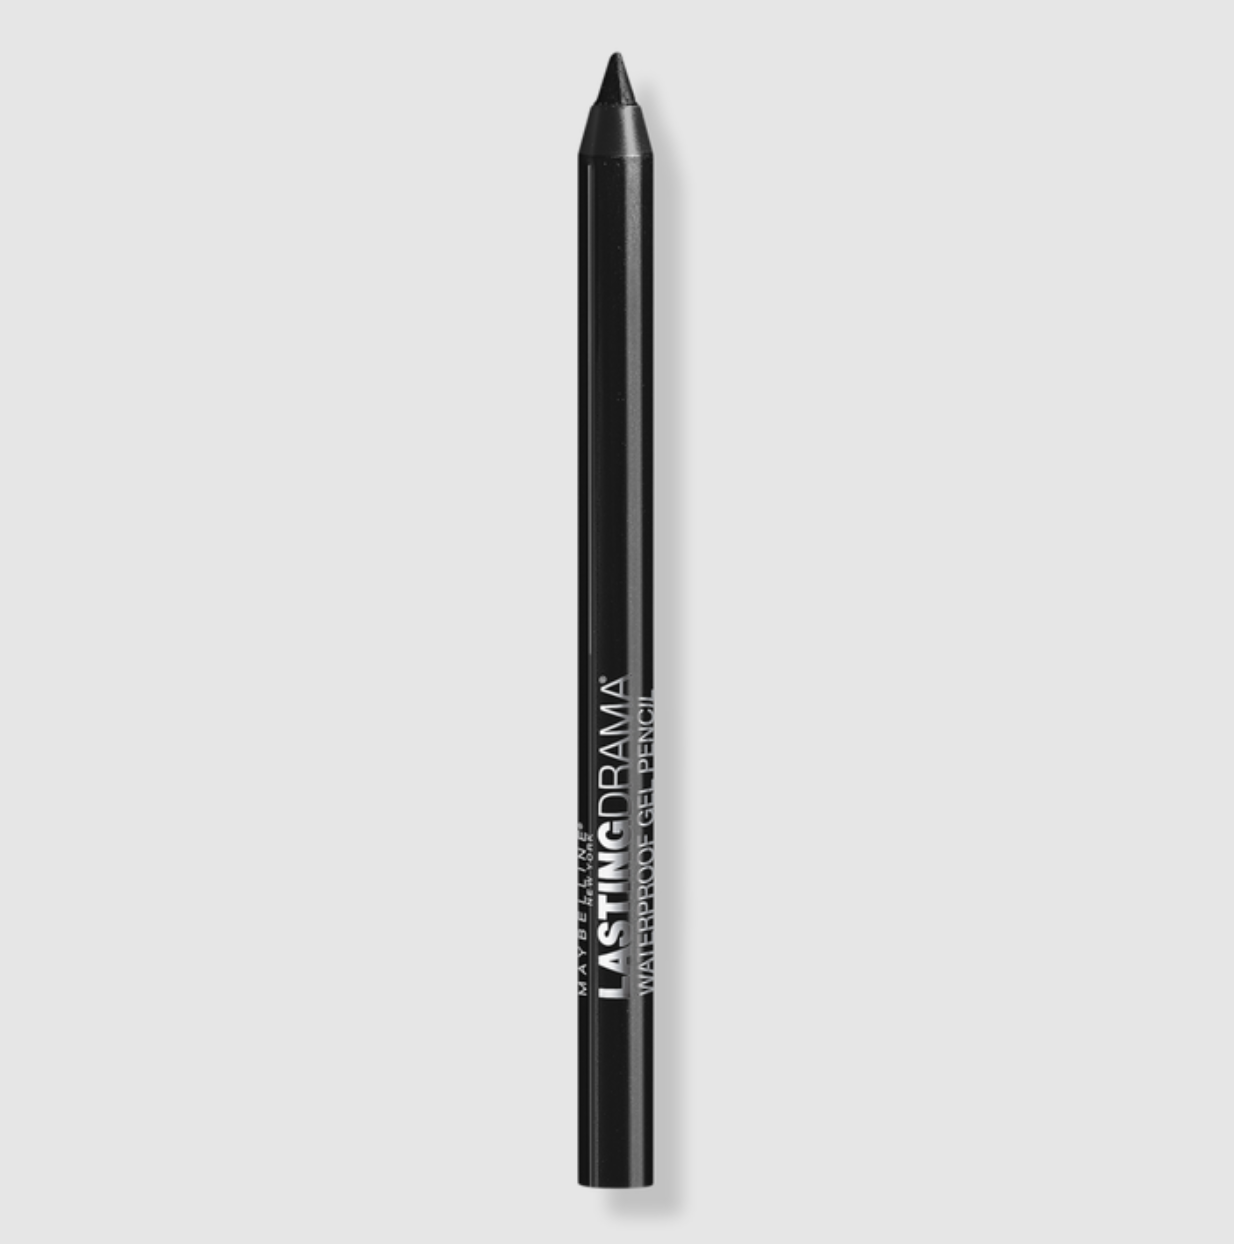 The 12 Best Eyeliners in 2023: Maybelline, L'Oreal, More